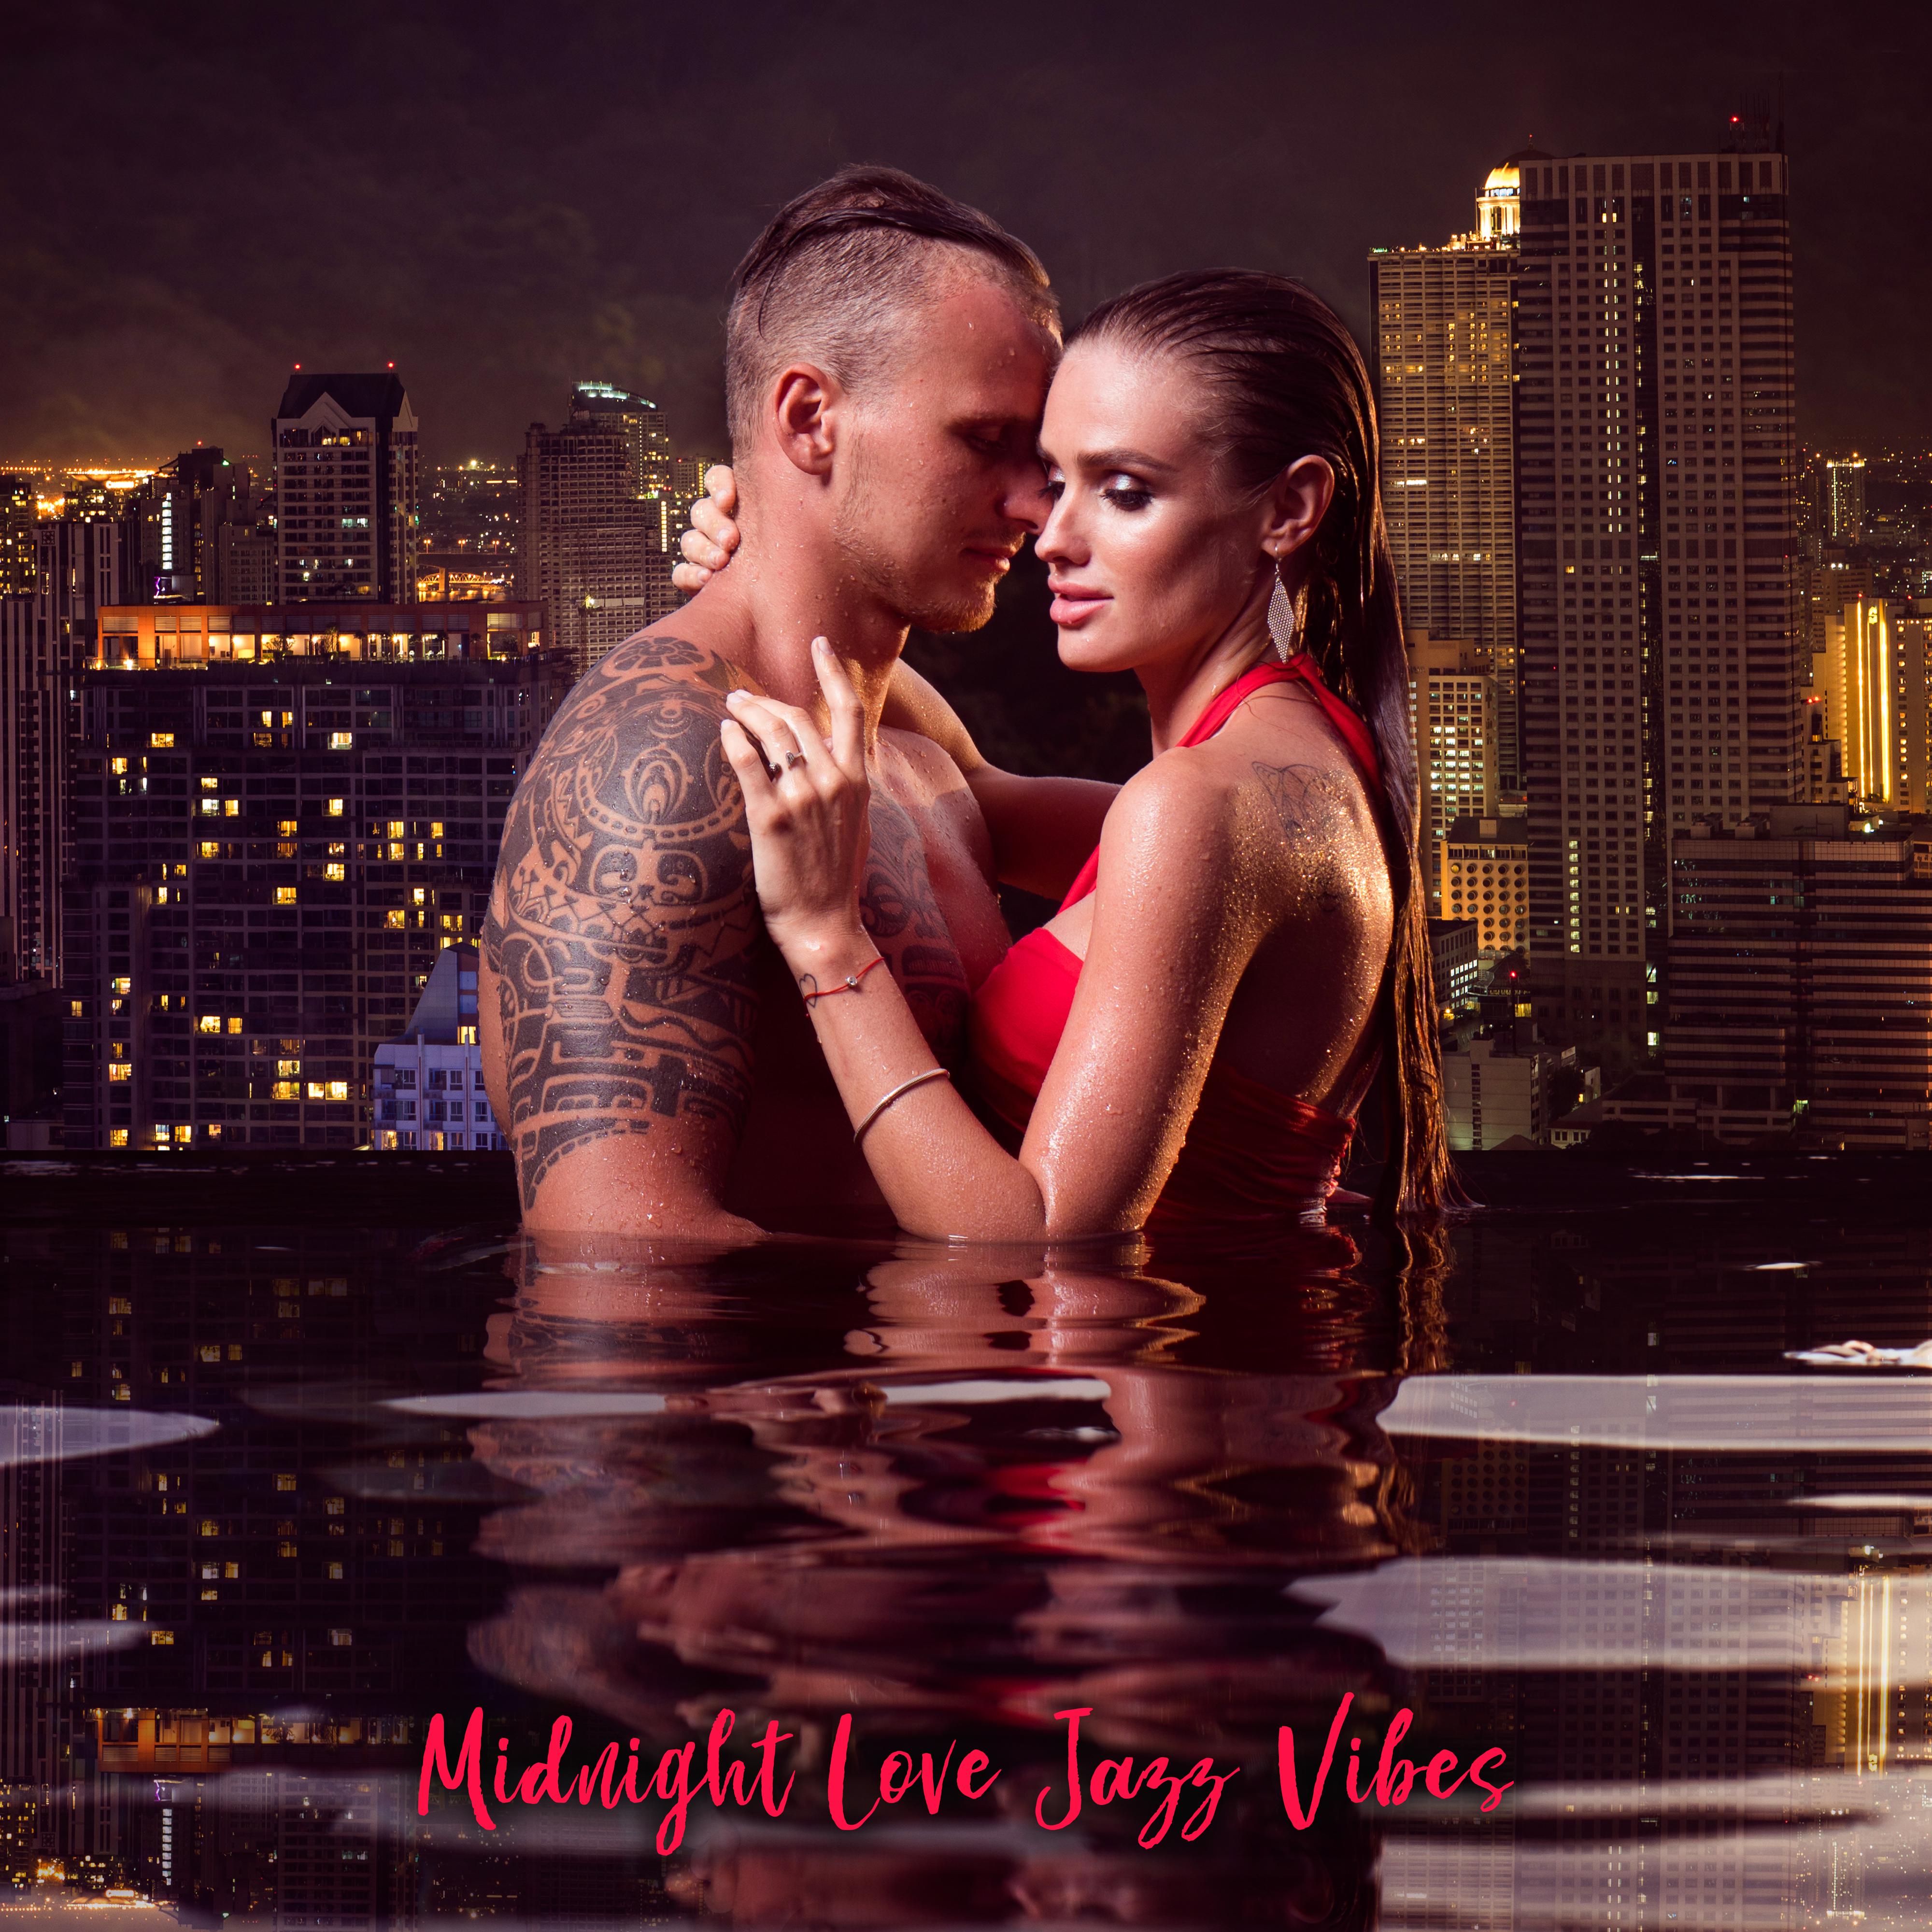 Midnight Love Jazz Vibes  2019 Sensual Smooth Jazz Music for Lovers, Romantic Evening, Erotic Massage, Hot Bath Together, Tantric  Sounds